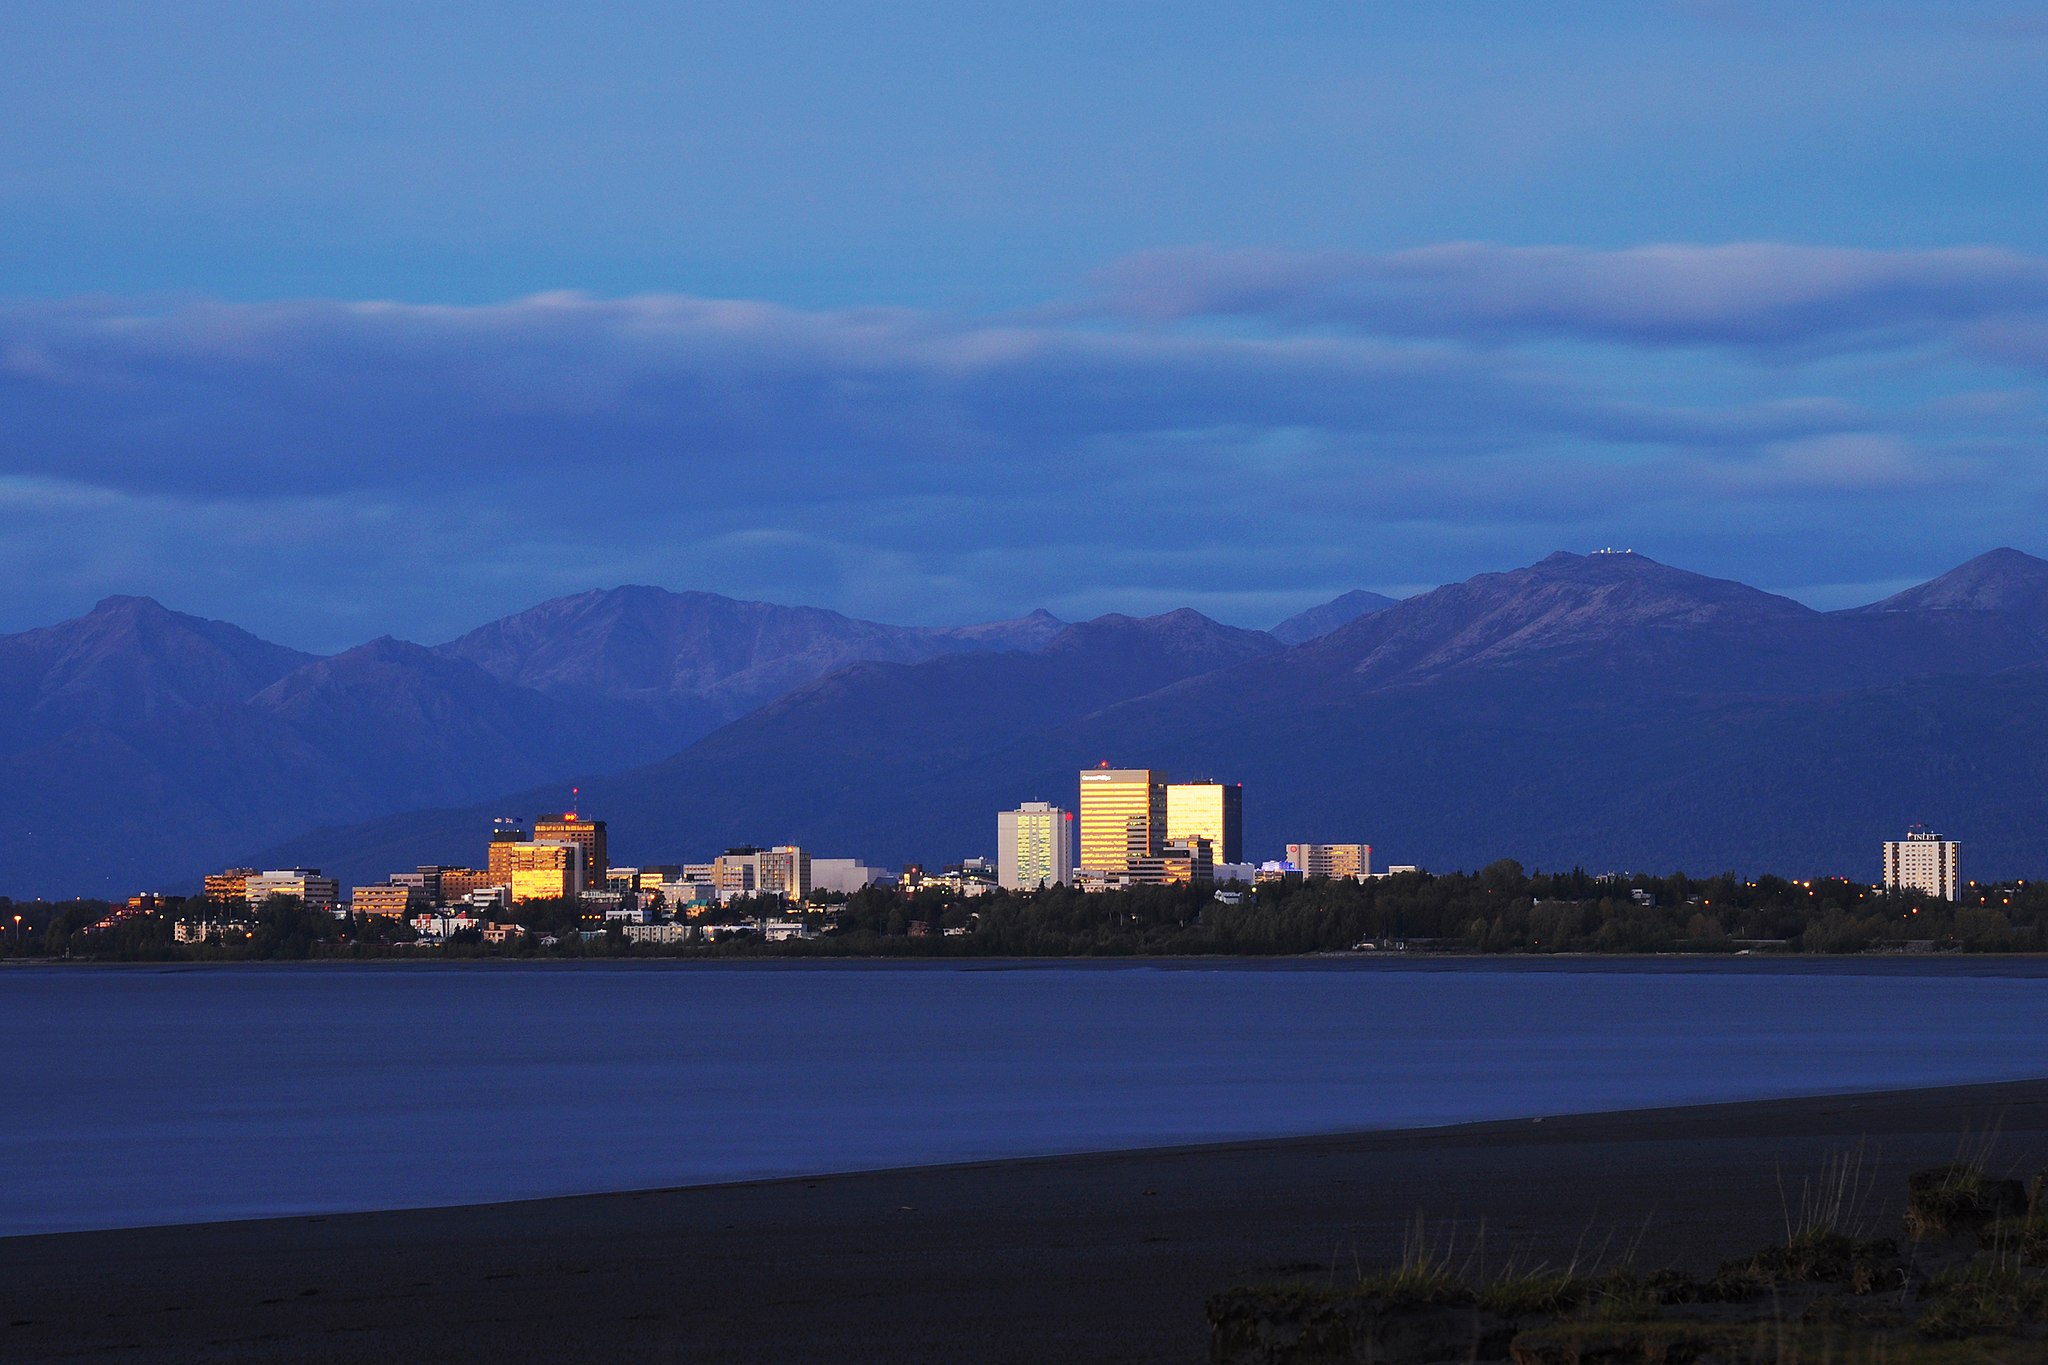 New ballot initiative hopes to kickstart Anchorage revitalization with sales tax